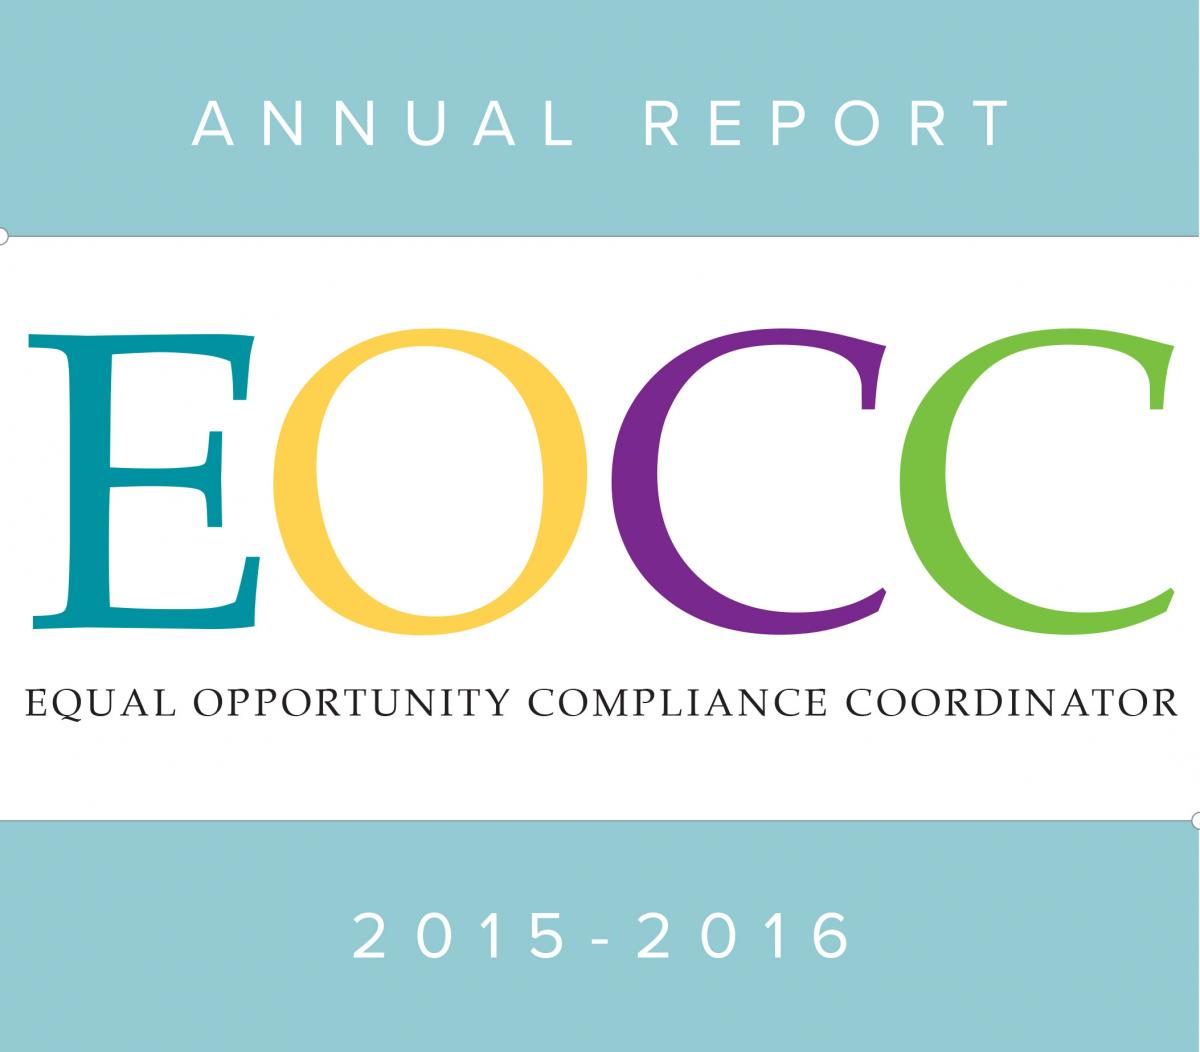 Equal Opportunity Compliance Coordinator (EOCC) Annual Report 2015-2016